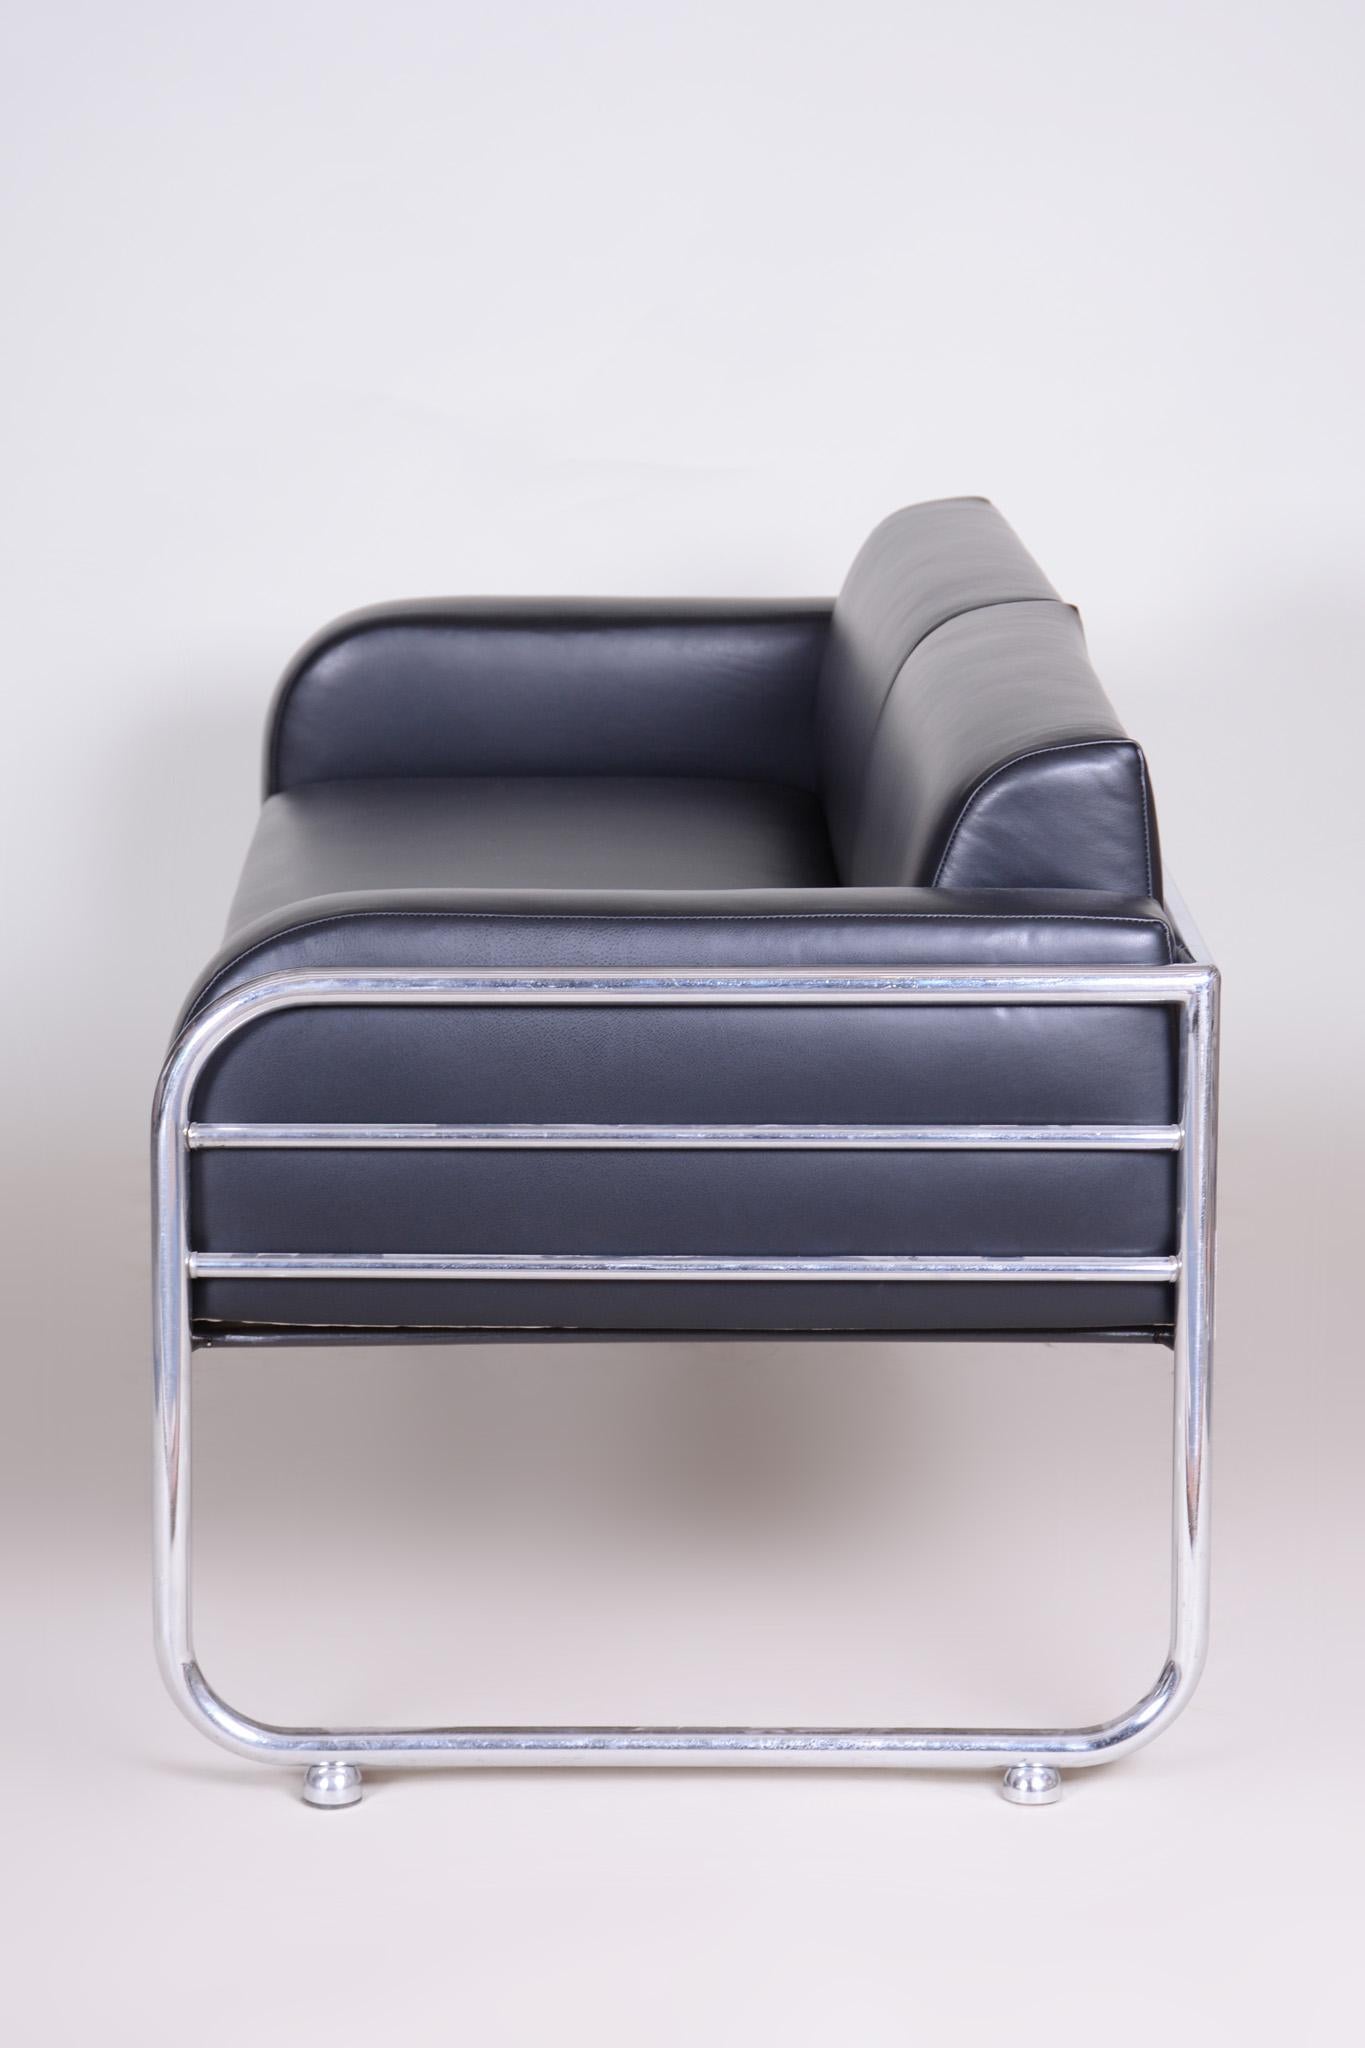 Fully Restored Bauhaus Leather and Chrome Sofa by Vichr a Spol, 1930s Czechia For Sale 8